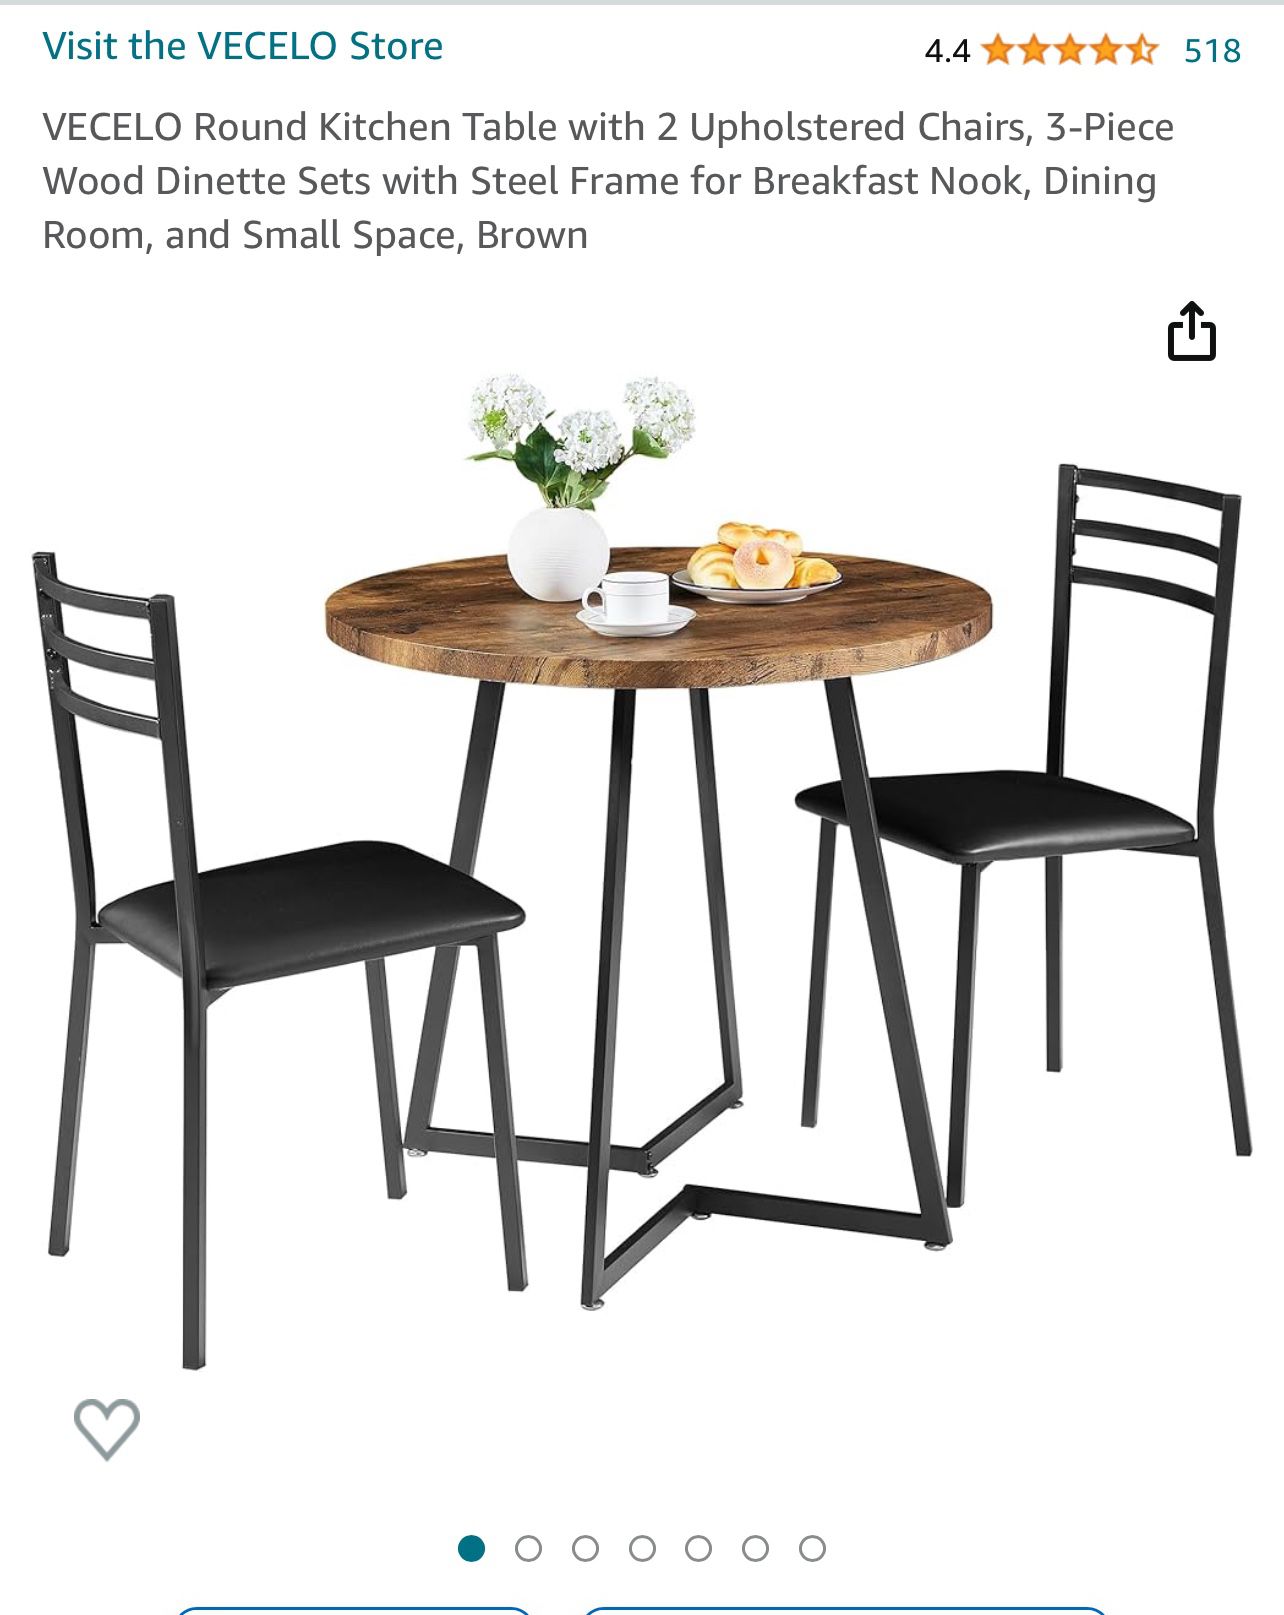 New table set